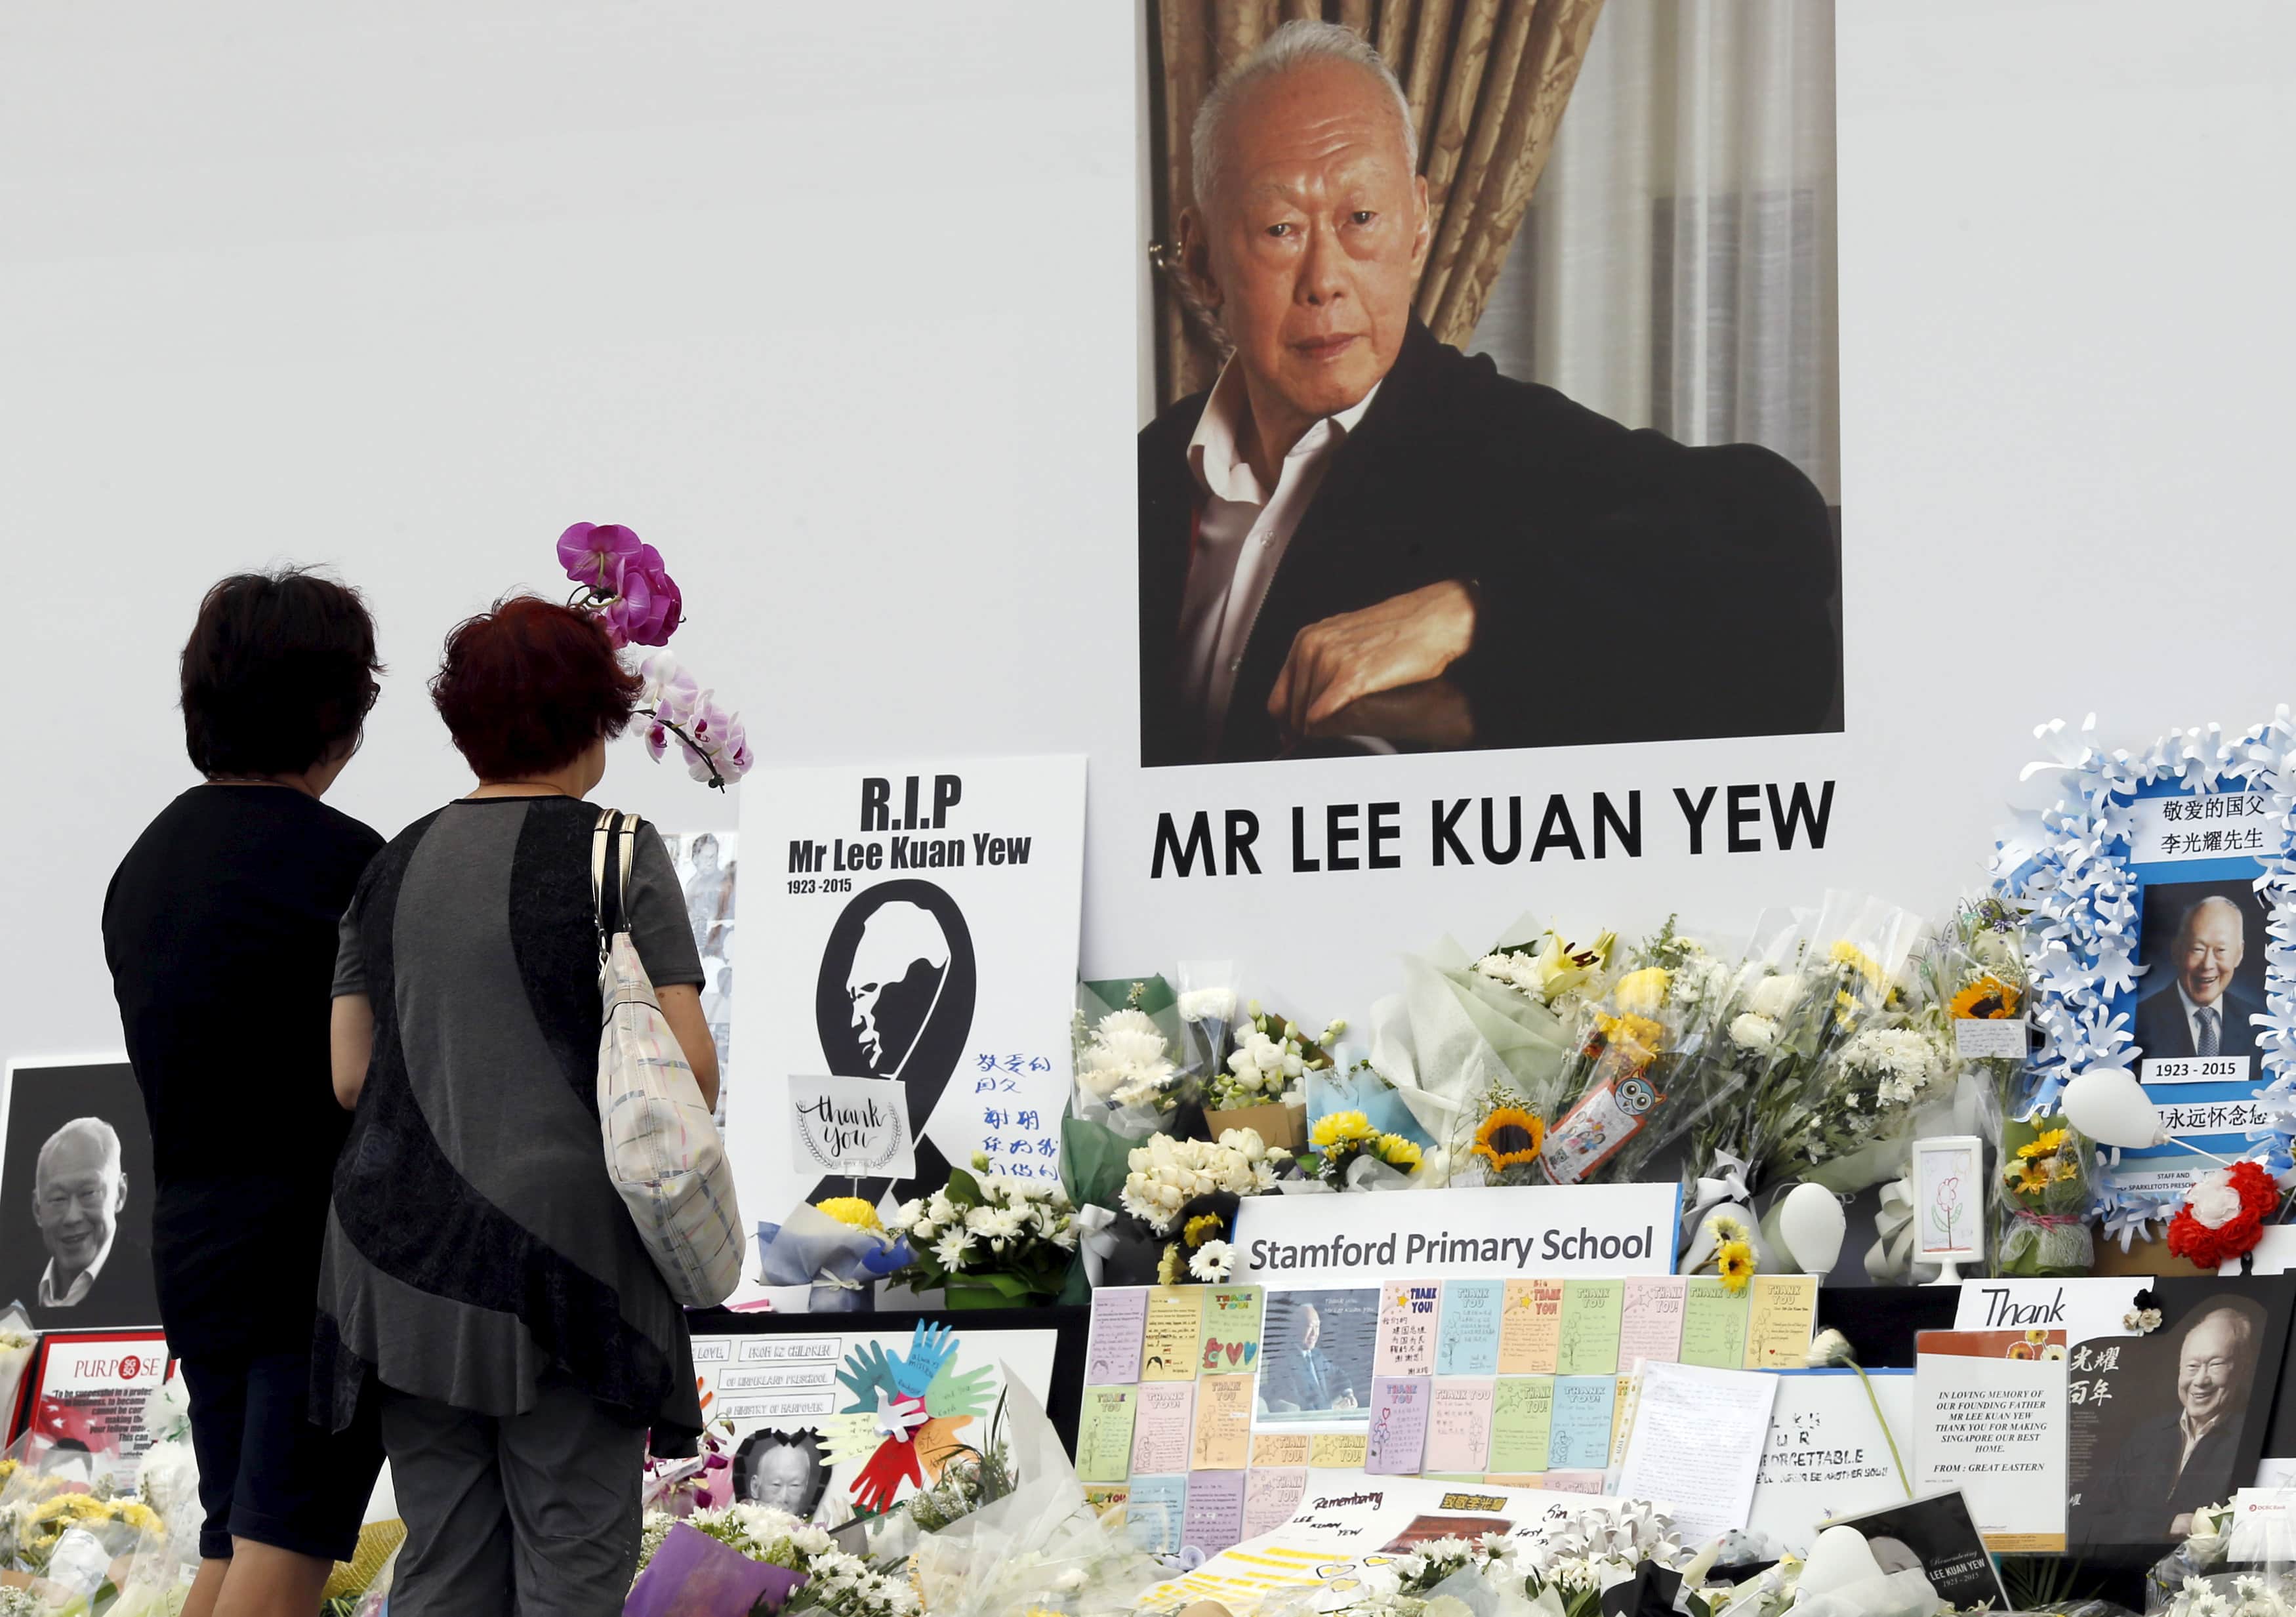 People pay their respects to the late first prime minister Lee Kuan Yew at a community tribute site in Singapore, 28 March 2015, REUTERS/Edgar Su